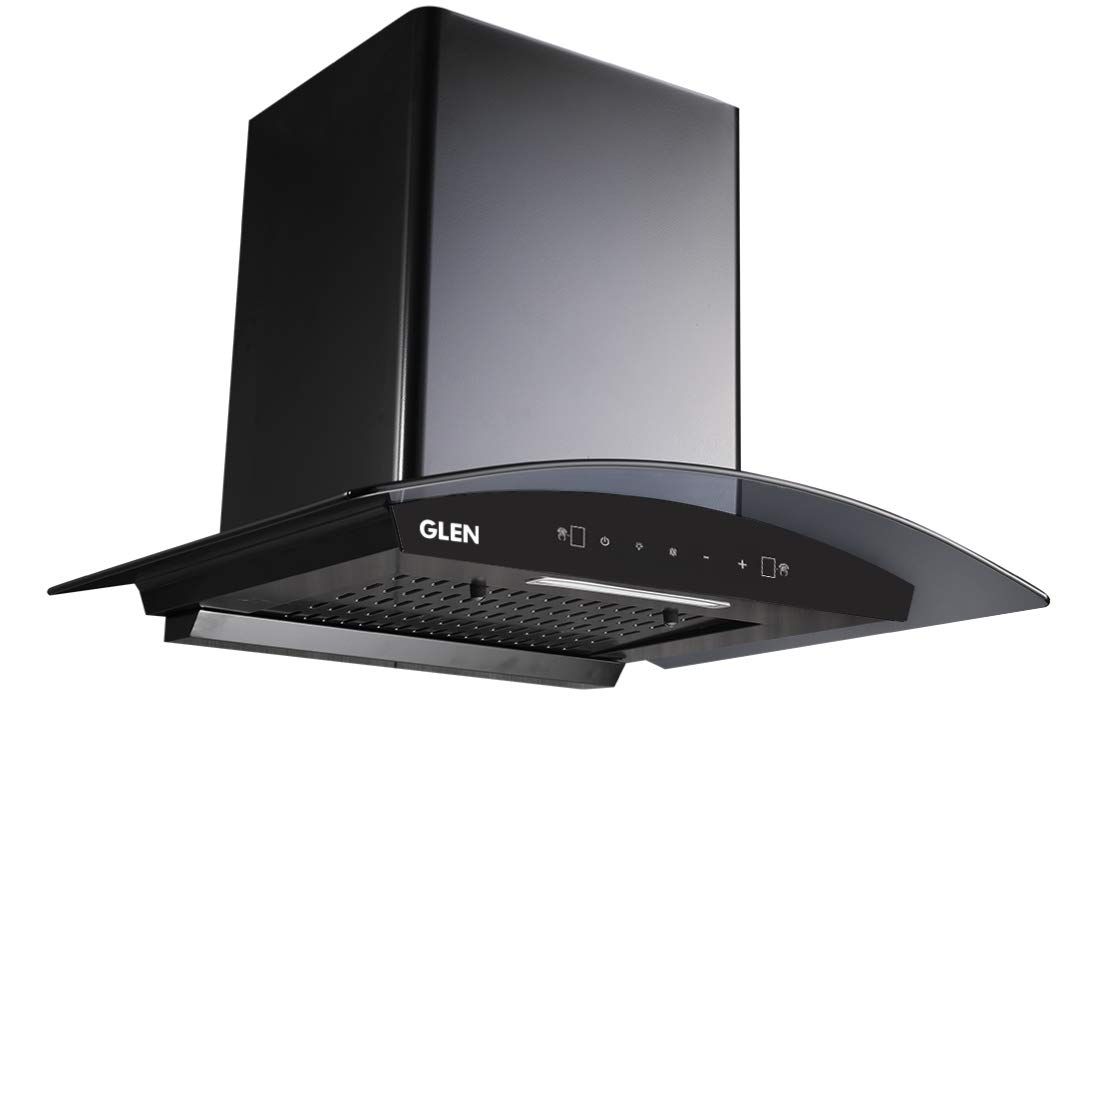 GLEN 60 cm 1200 m3/hr Auto-Clean Filterless Curved Glass Kitchen Chimney With 1 Year Comprehensive Warranty and 5 Year Warranty on Motor,Touch+Motion Sensor Controls (6060 Black)